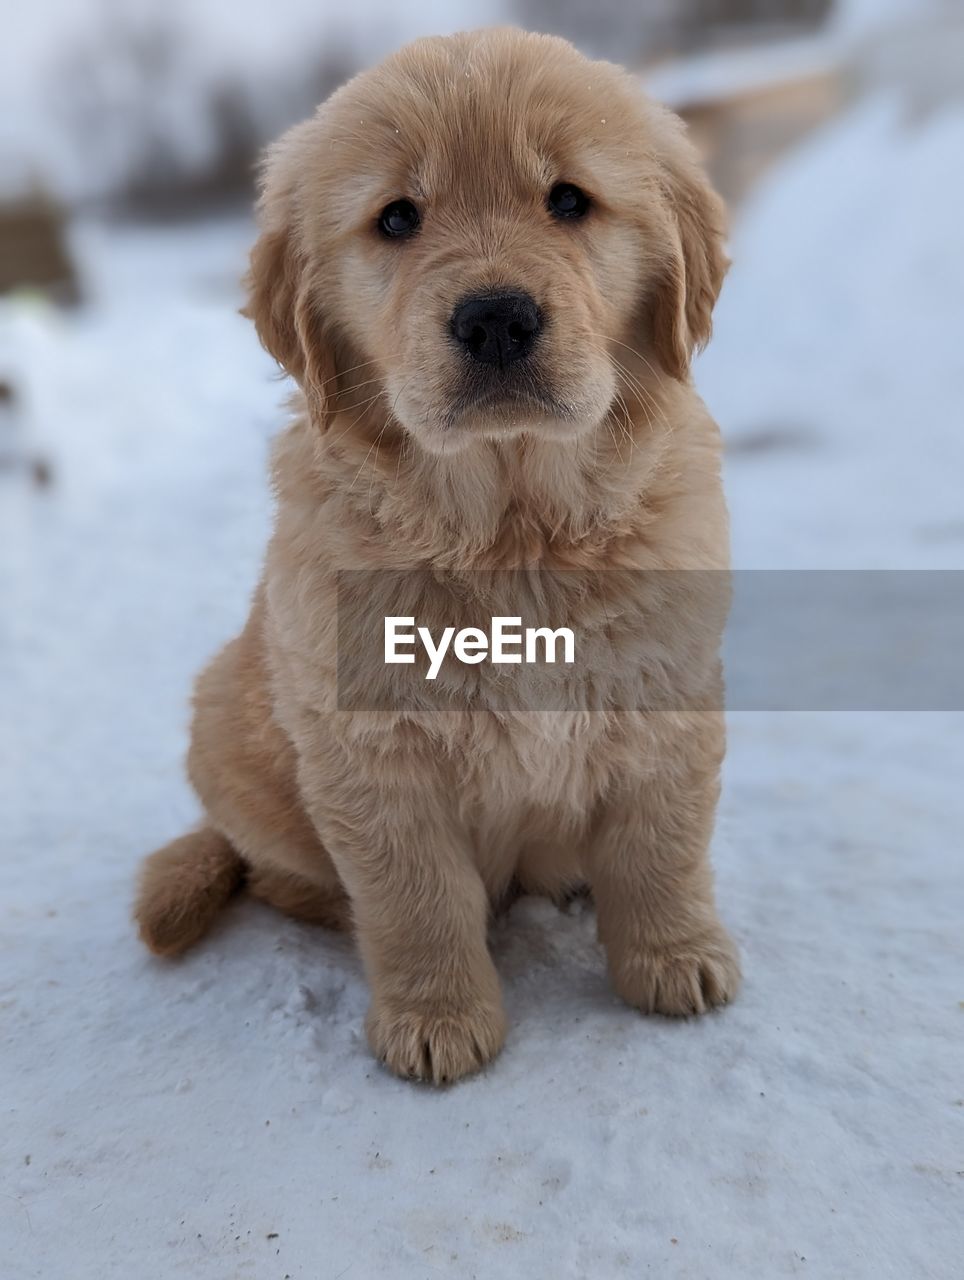 pet, dog, canine, one animal, animal themes, animal, mammal, domestic animals, puppy, golden retriever, retriever, portrait, cute, young animal, snow, cold temperature, winter, sitting, looking at camera, carnivore, no people, full length